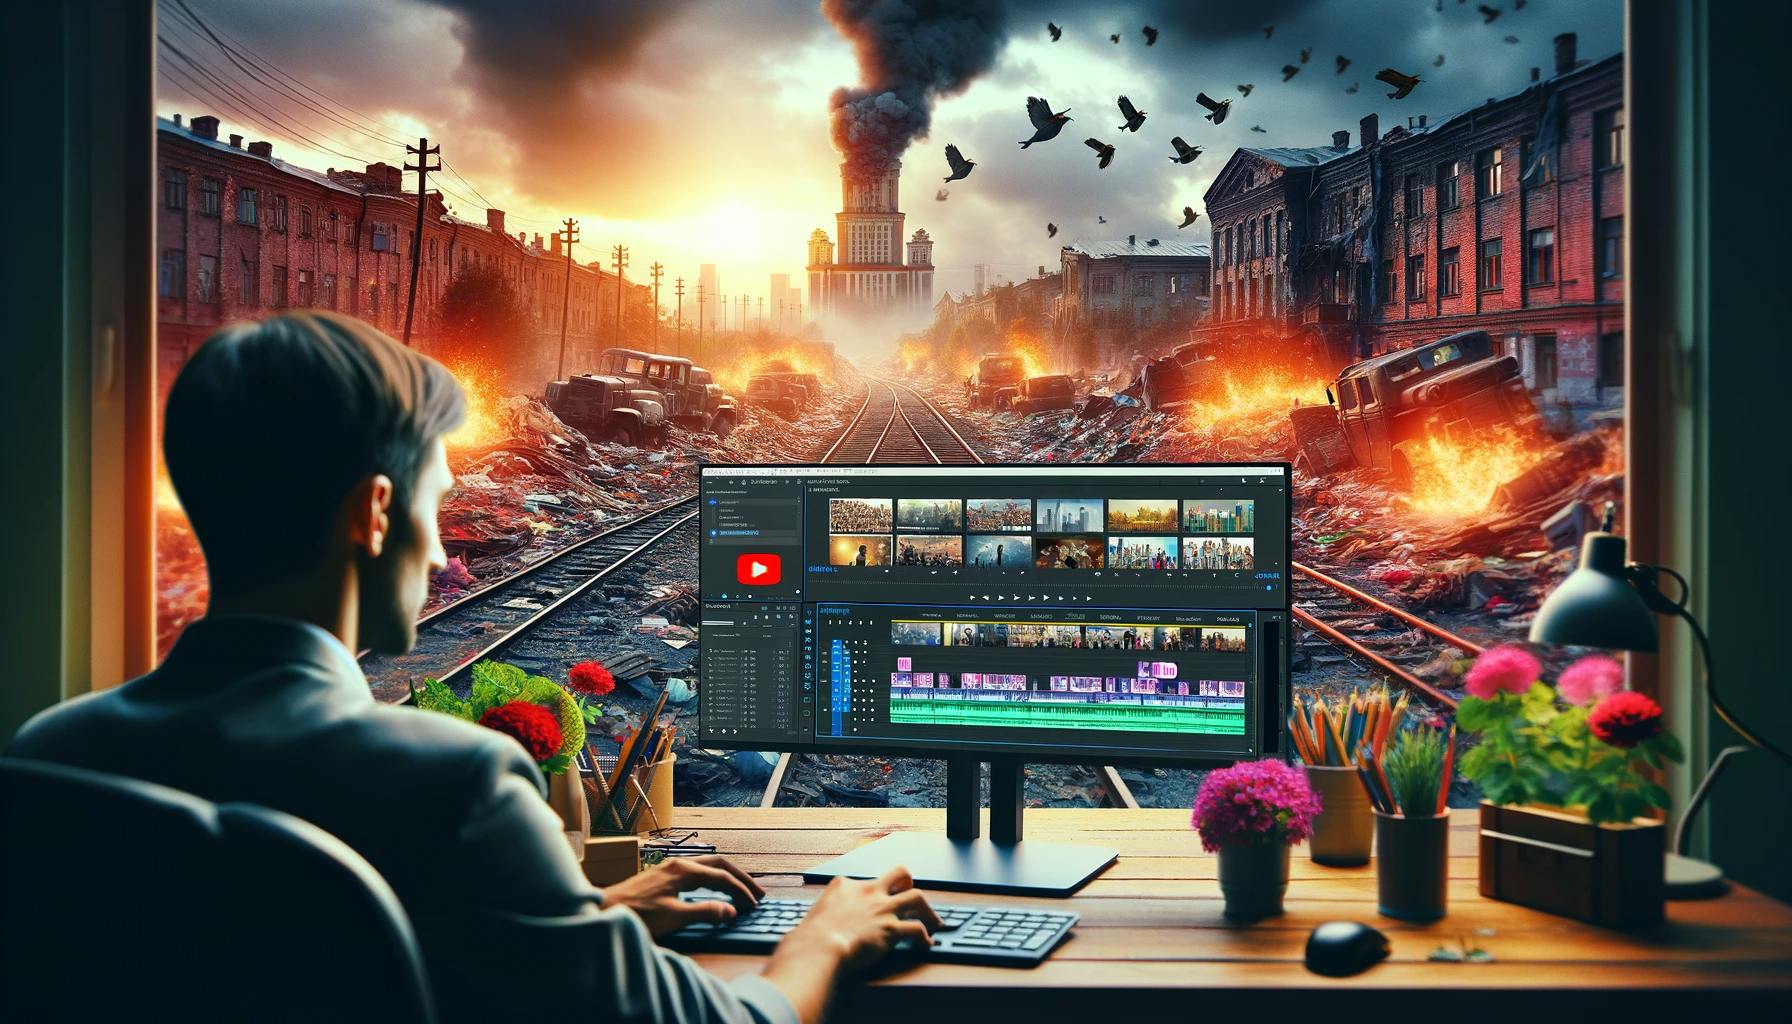 Video creator in front of his computer amidst a raging war scene.